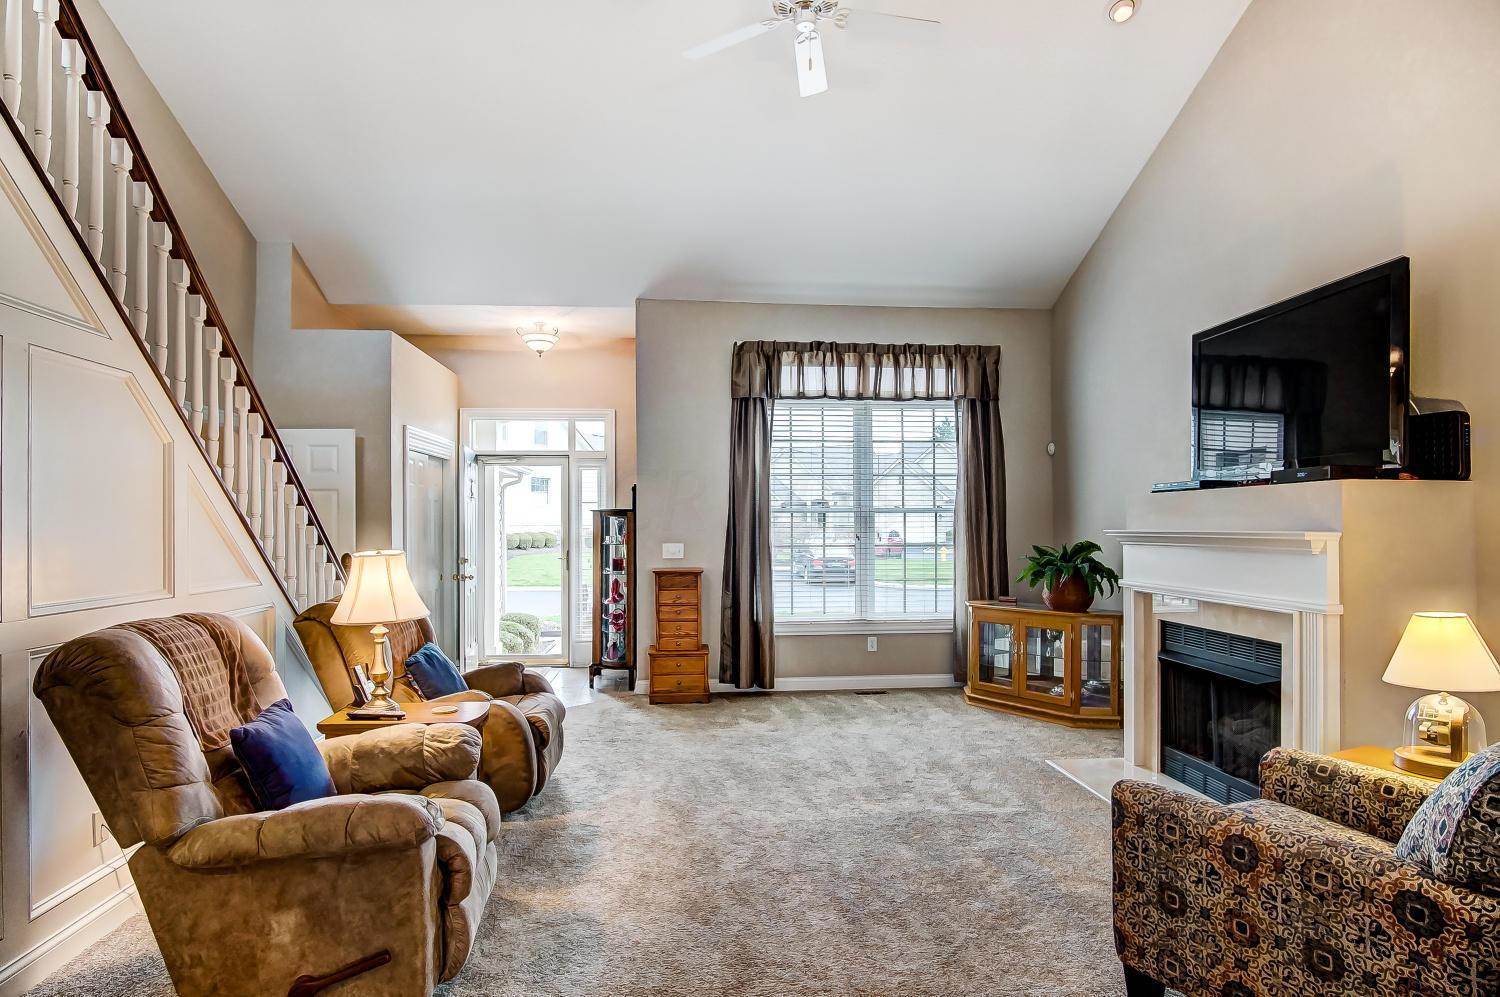 7969 Linksview Circle, Westerville, OH 43082